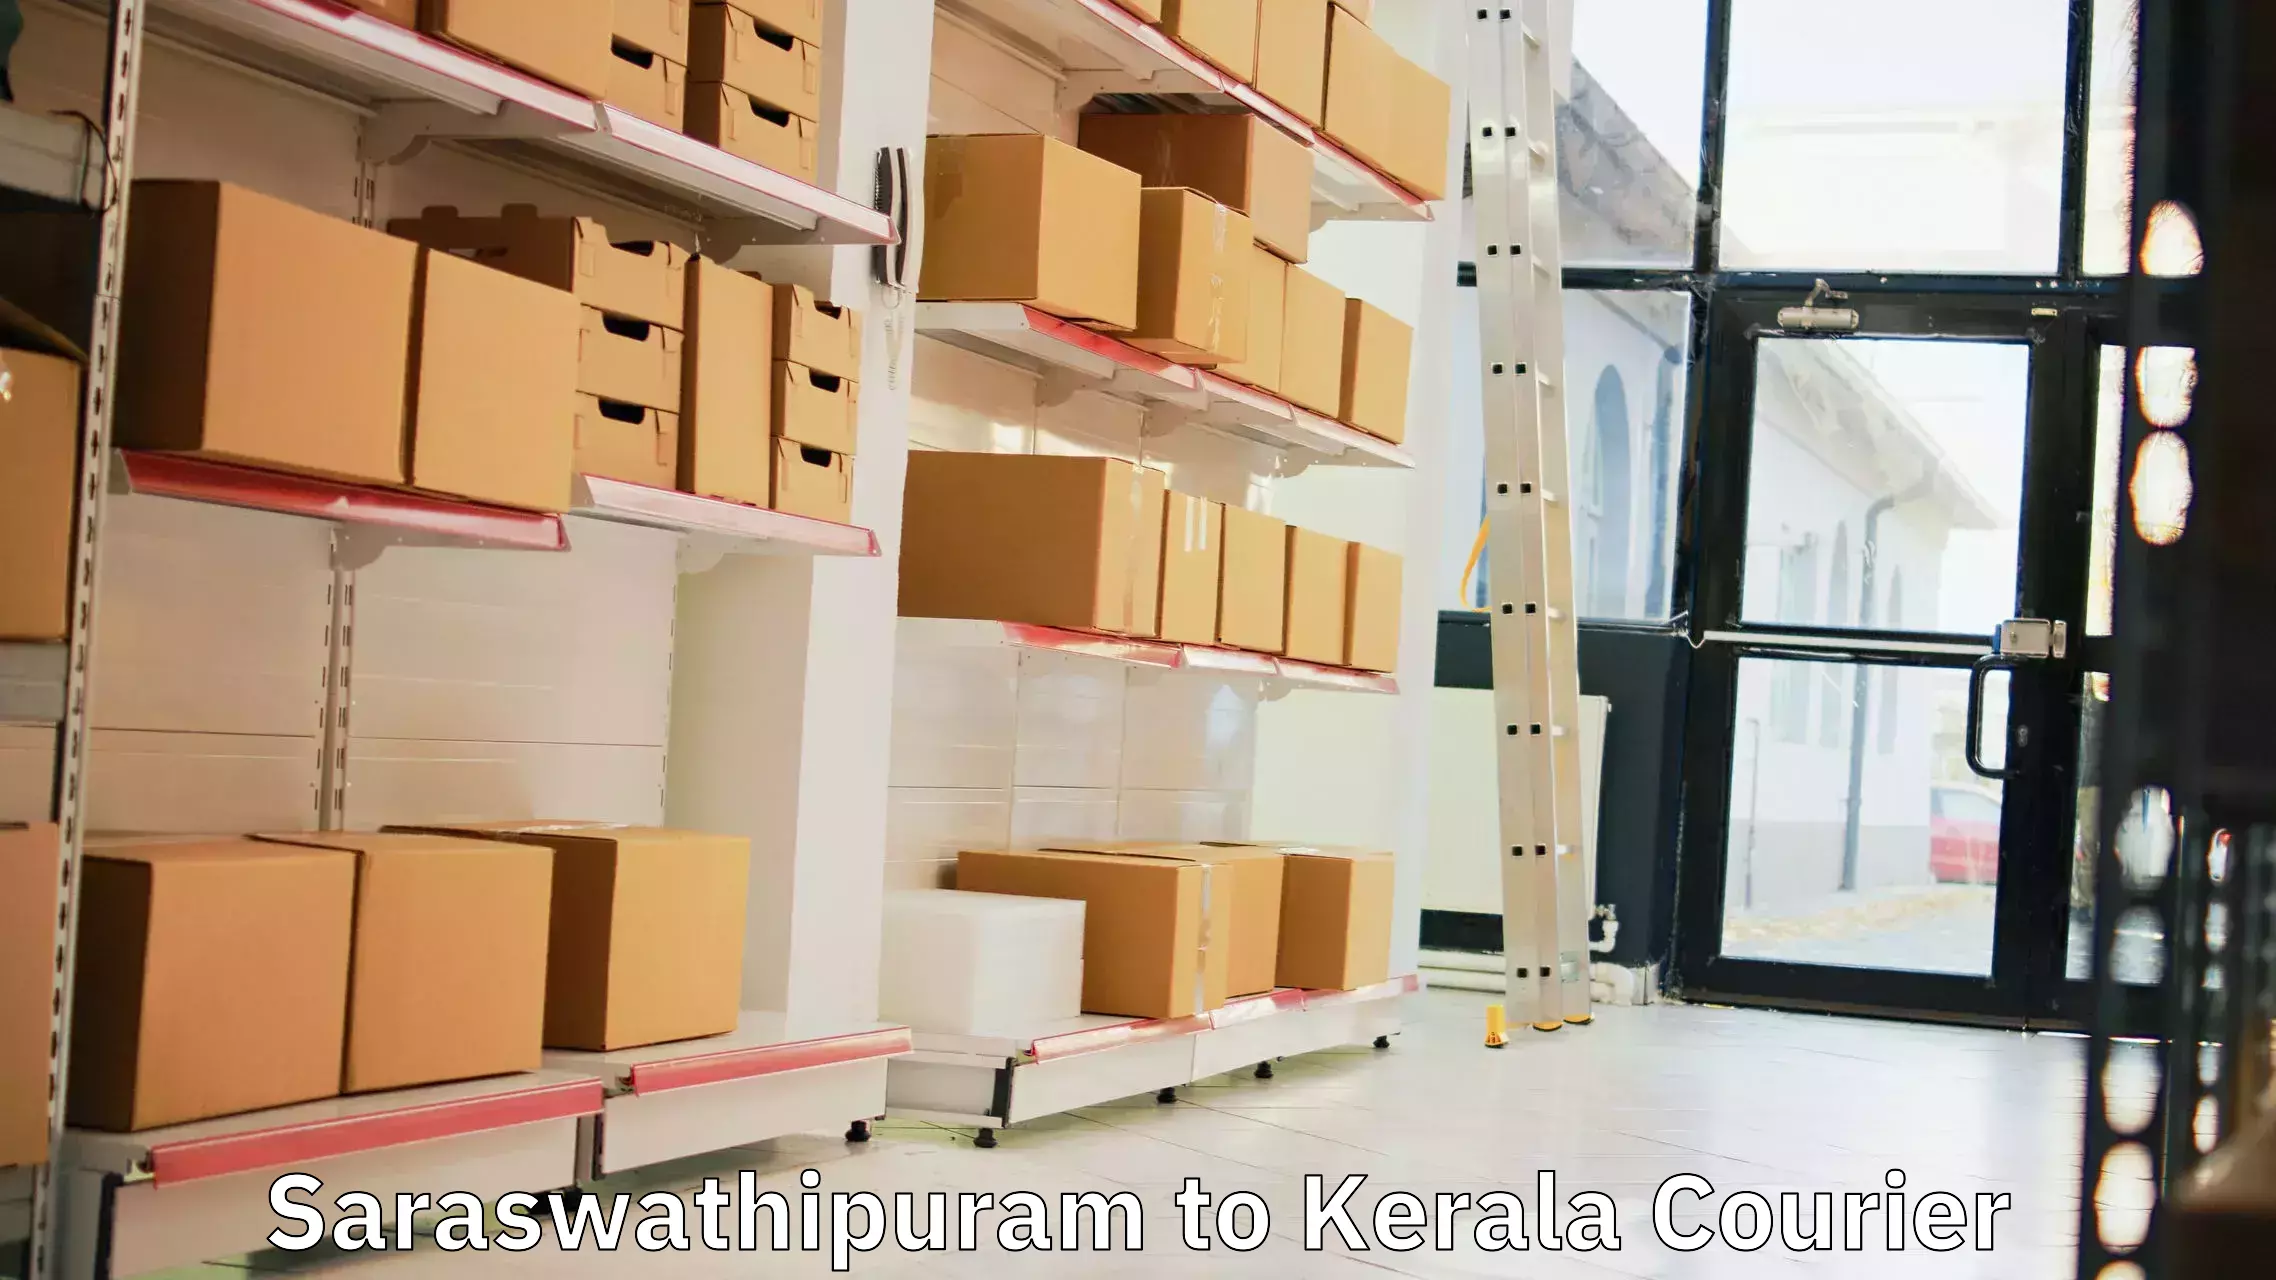 Integrated shipping solutions Saraswathipuram to Cochin University of Science and Technology